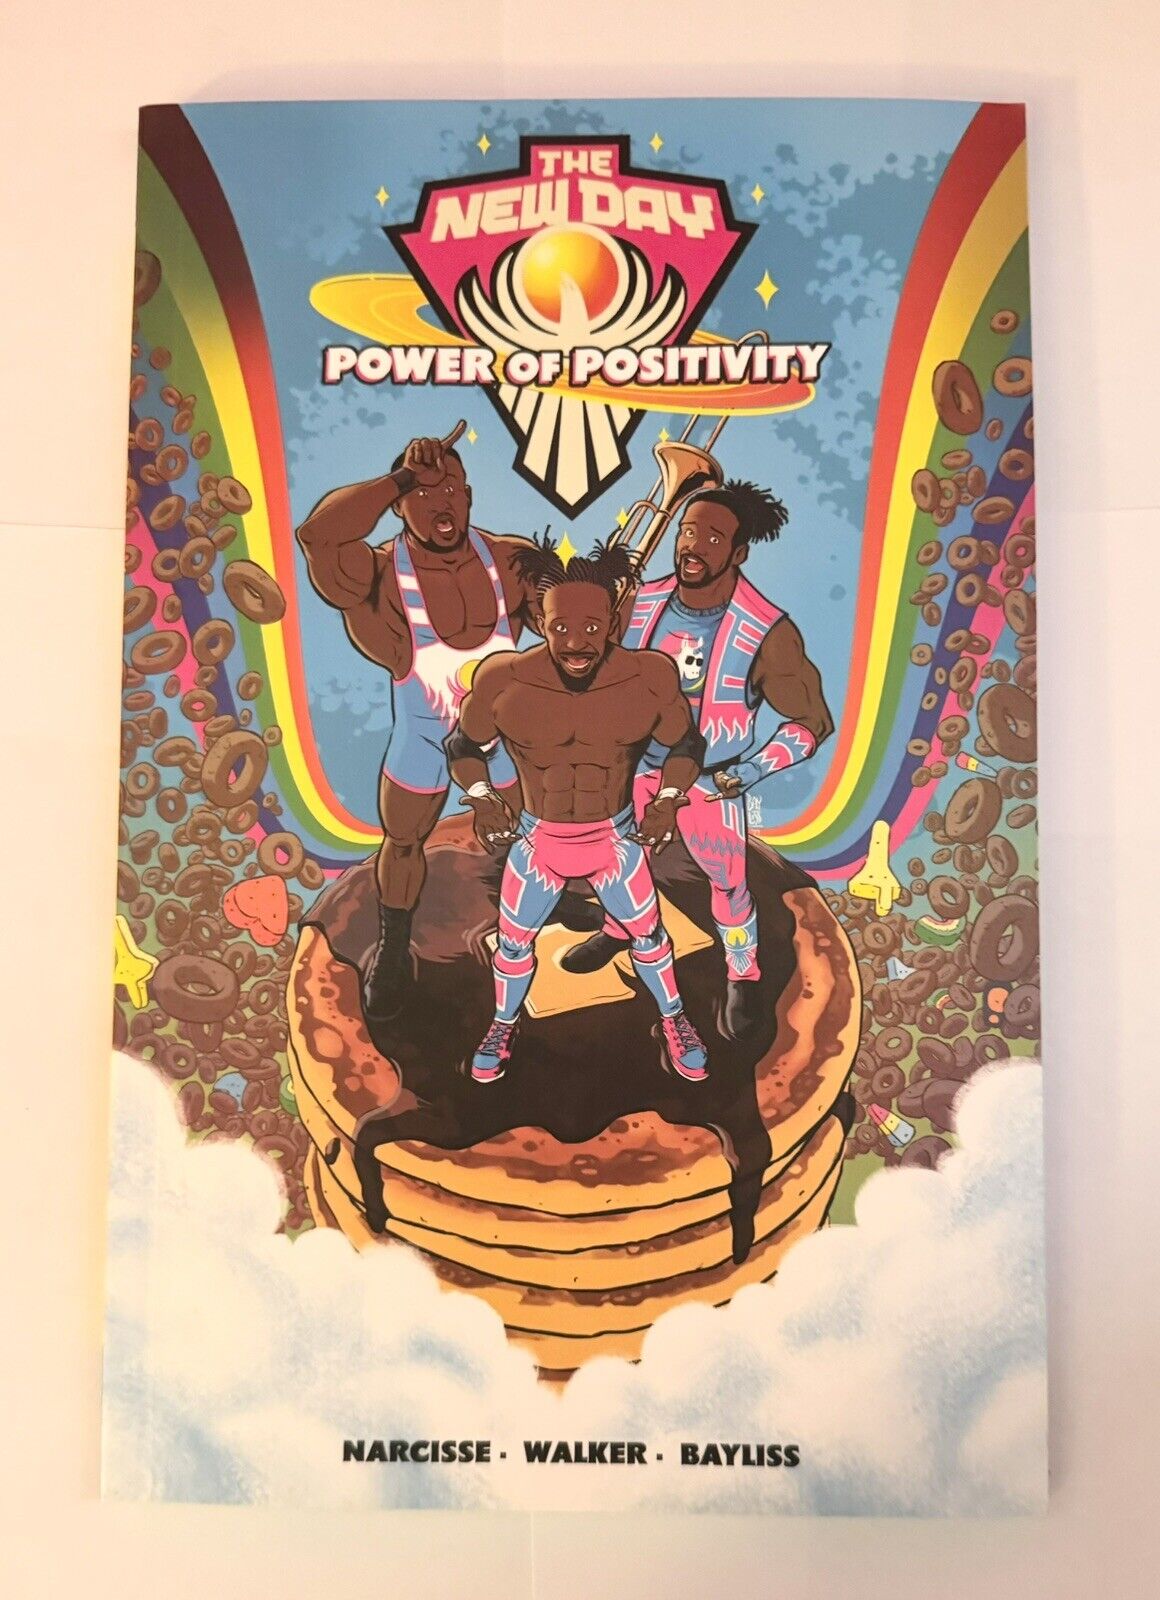 WWE: The New Day: Power of Positivity Paperback